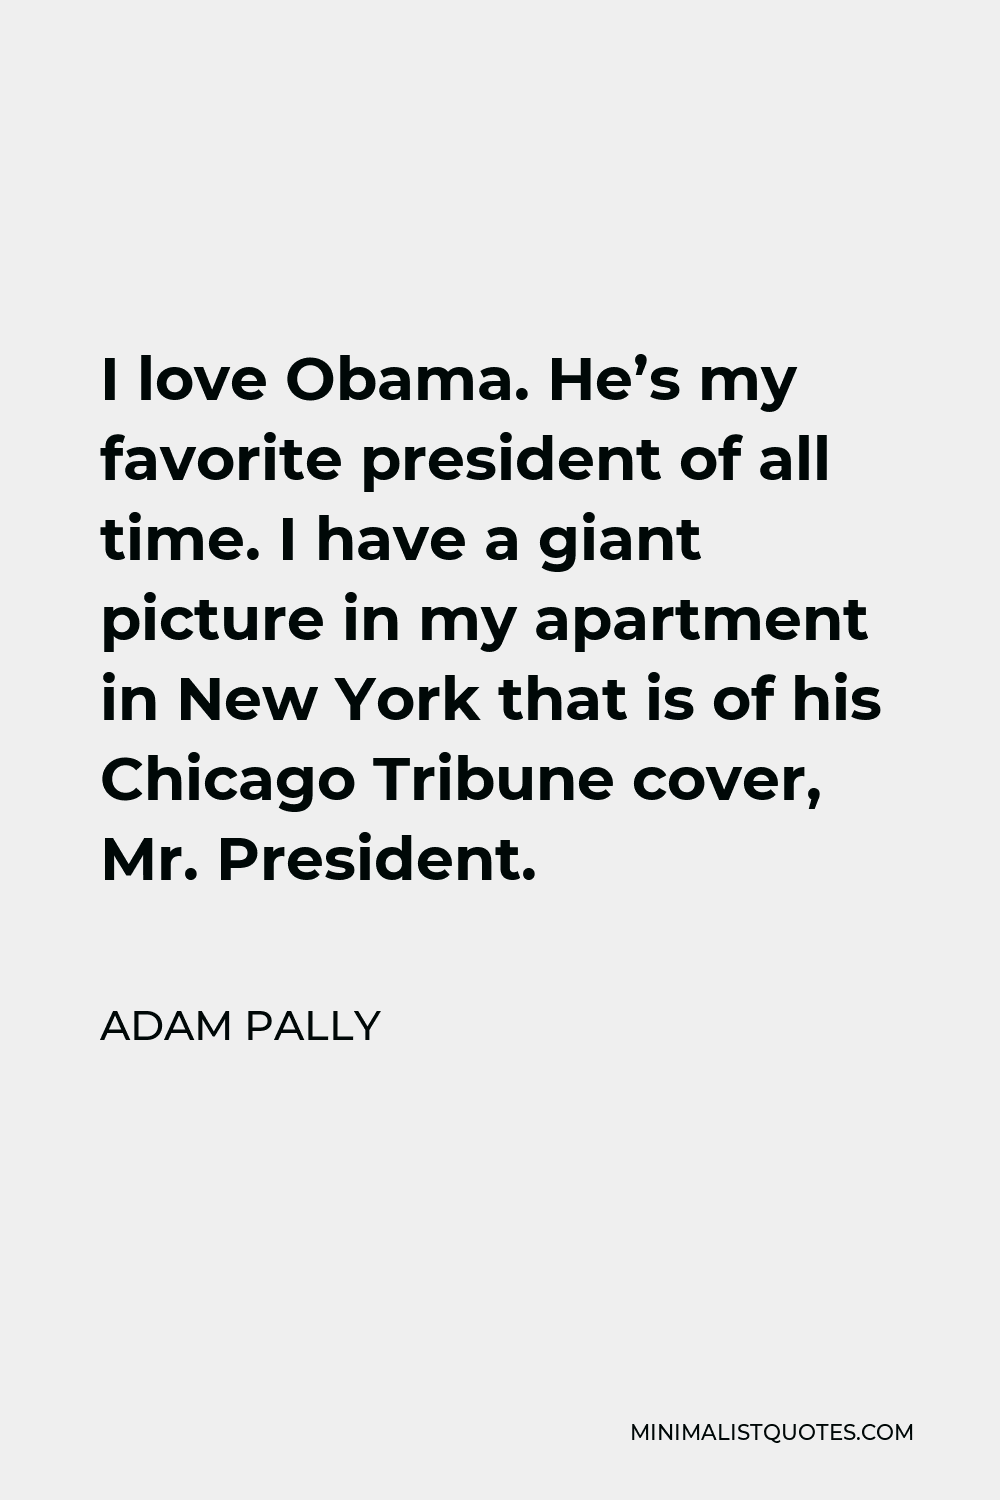 Adam Pally Quote - I love Obama. He’s my favorite president of all time. I have a giant picture in my apartment in New York that is of his Chicago Tribune cover, Mr. President.